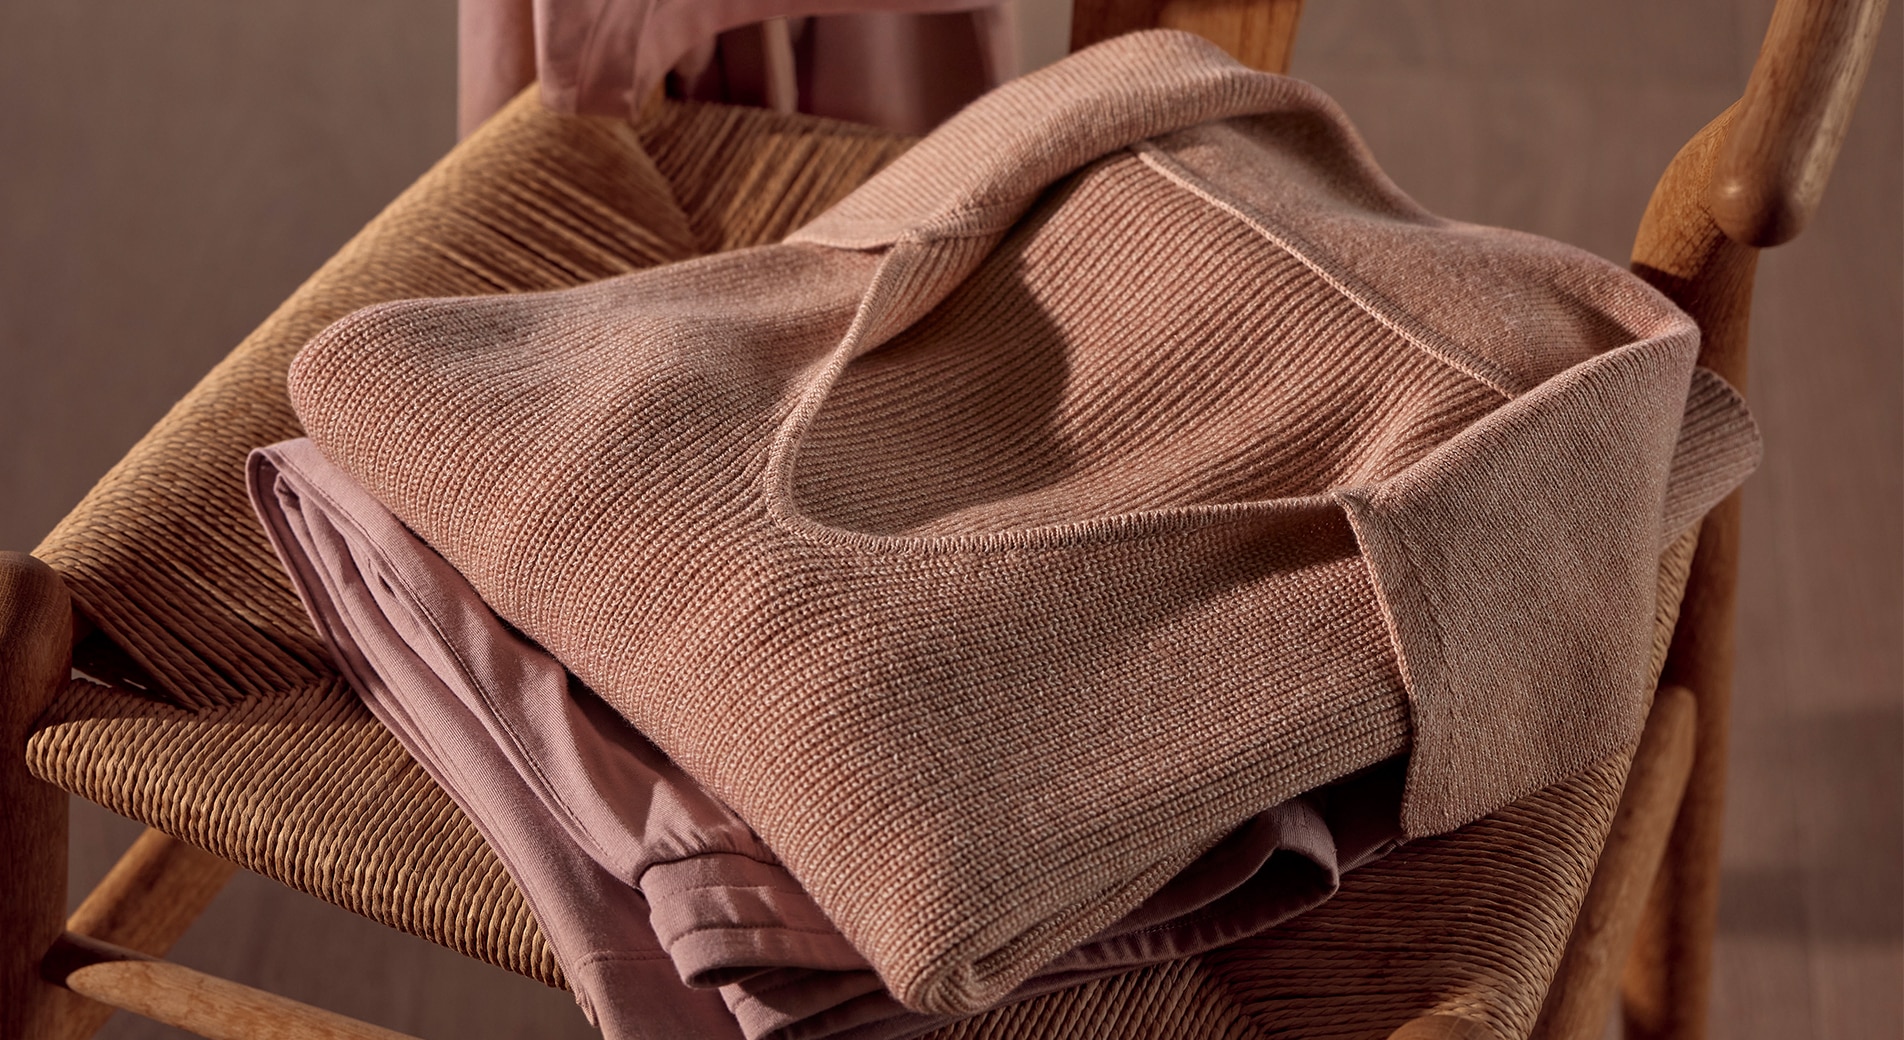 relaxing bedroom ideas. close up of merino knit wool sweater in the colour chia, sitting on a wicker wooden chair.